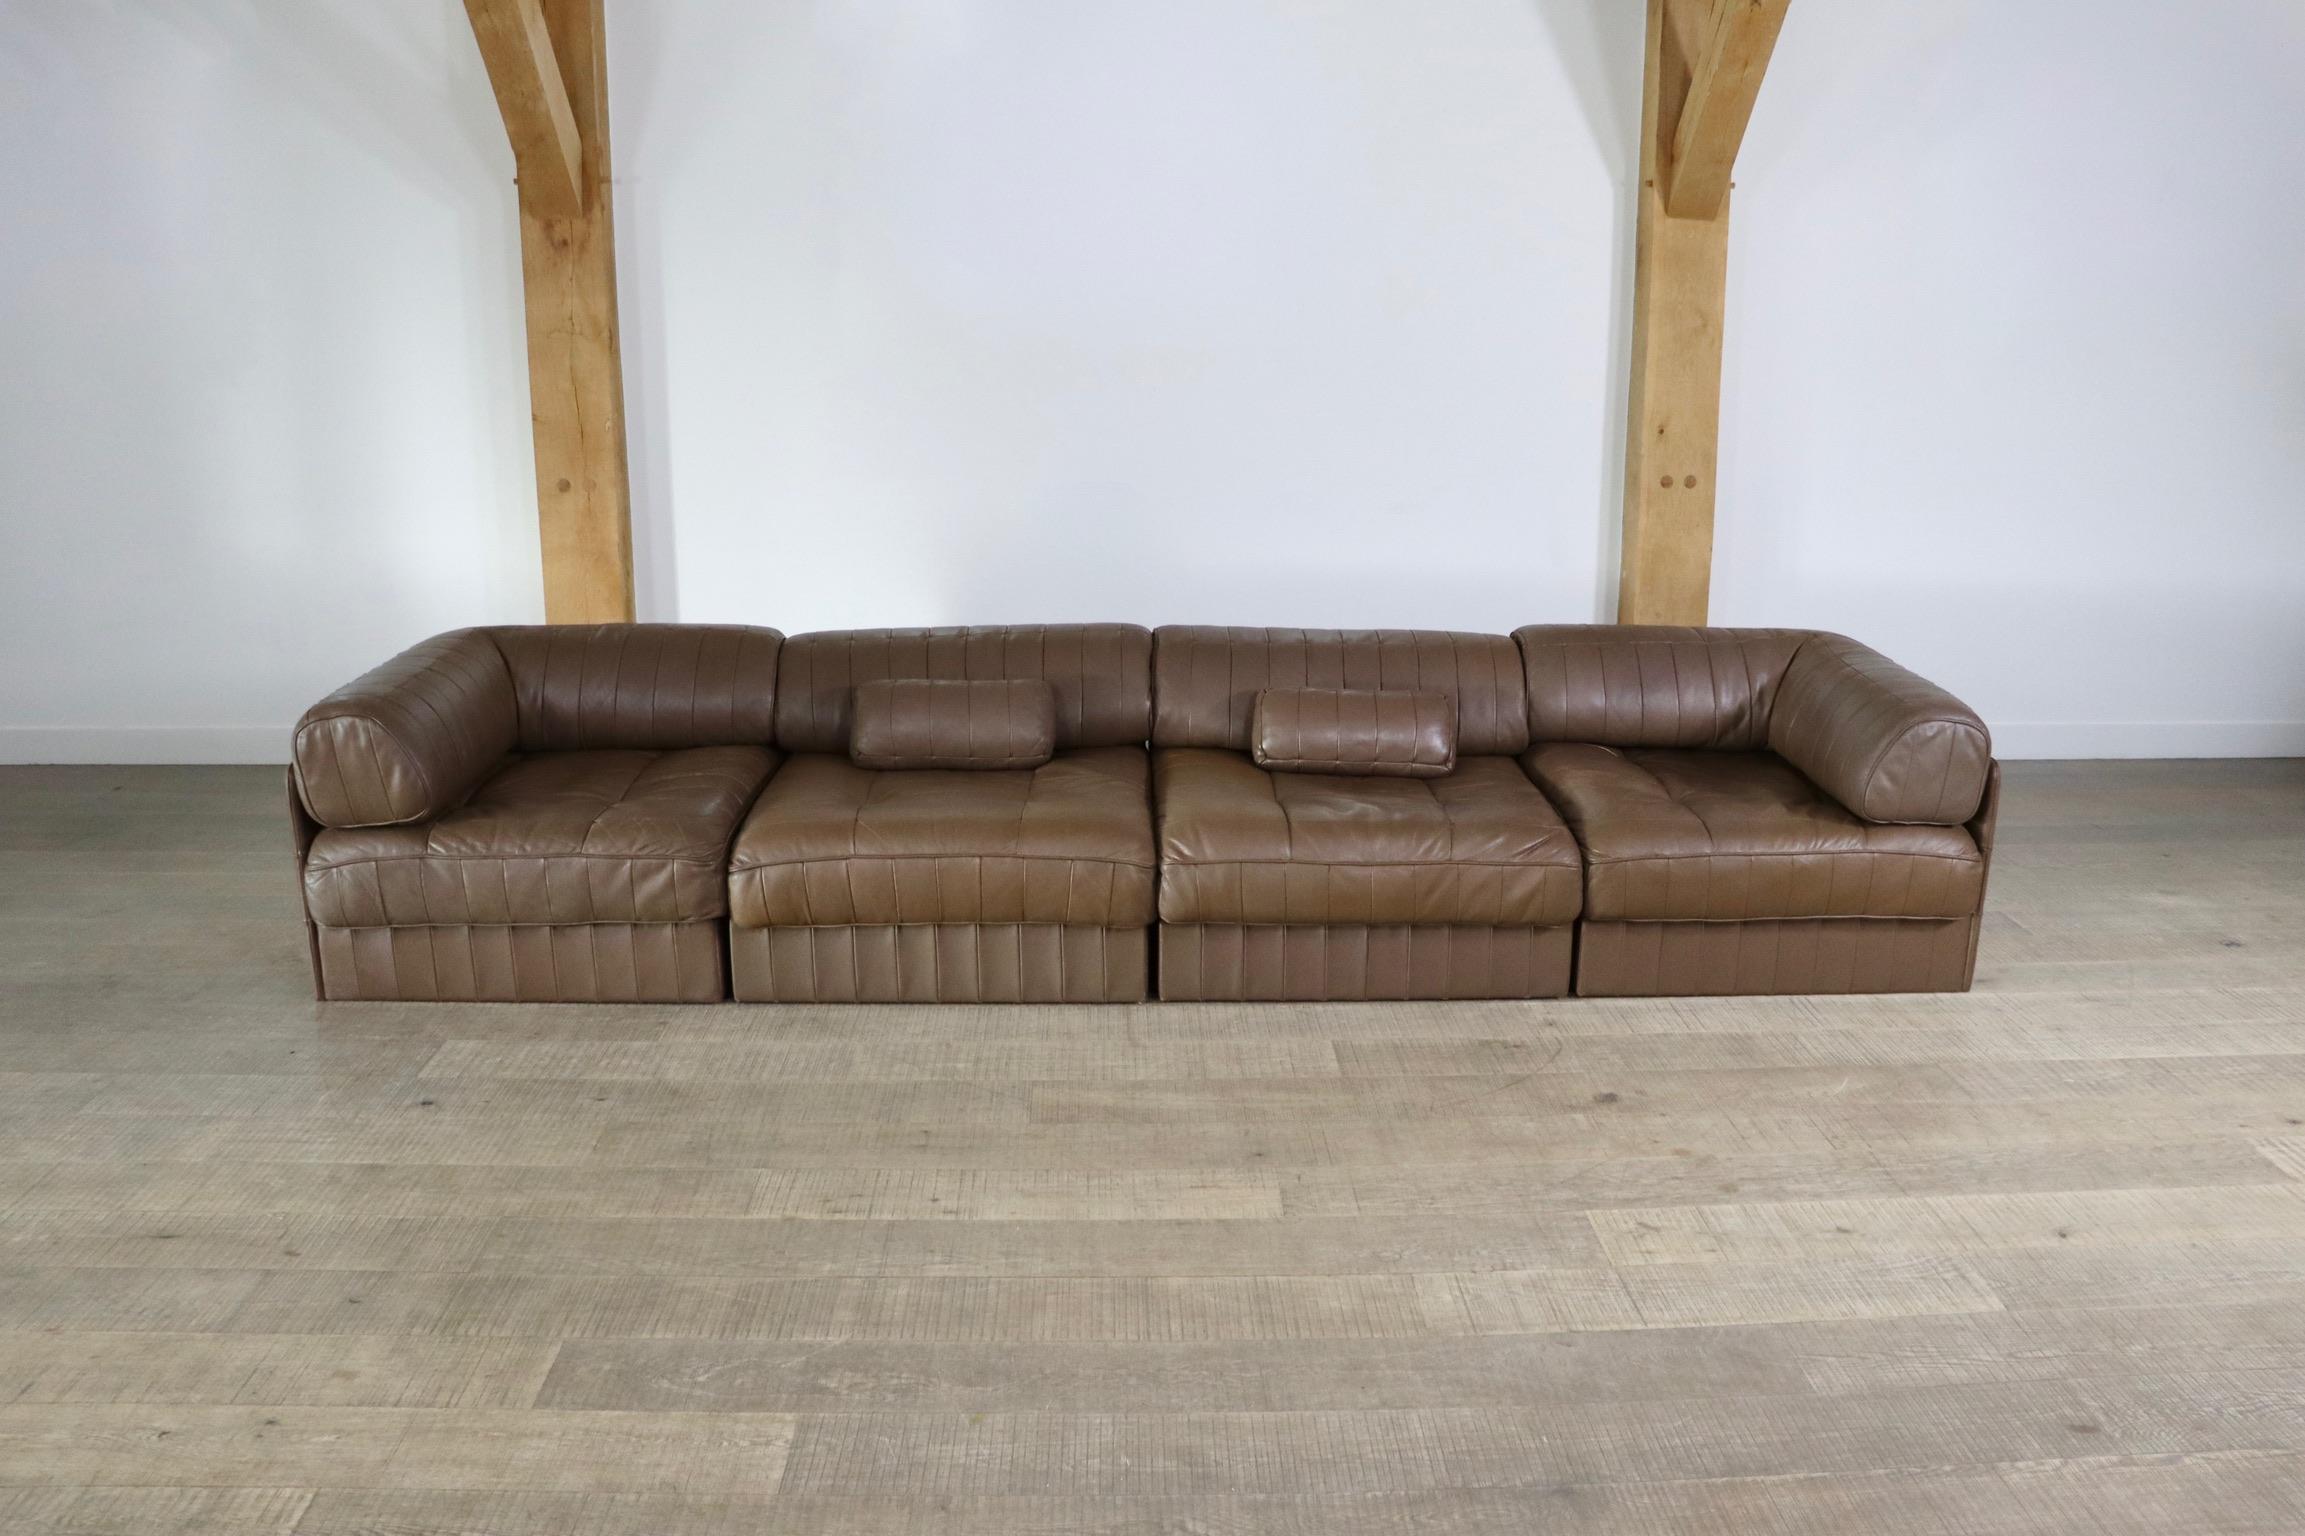 Beautiful DS-88 patchwork leather sofa designed and manufactured by De Sede, Switzerland 1970s. The sofa consists of 4 elements, each with a base leather patchwork cushion and back cushion made from the same soft luxurious leather. The sofa has